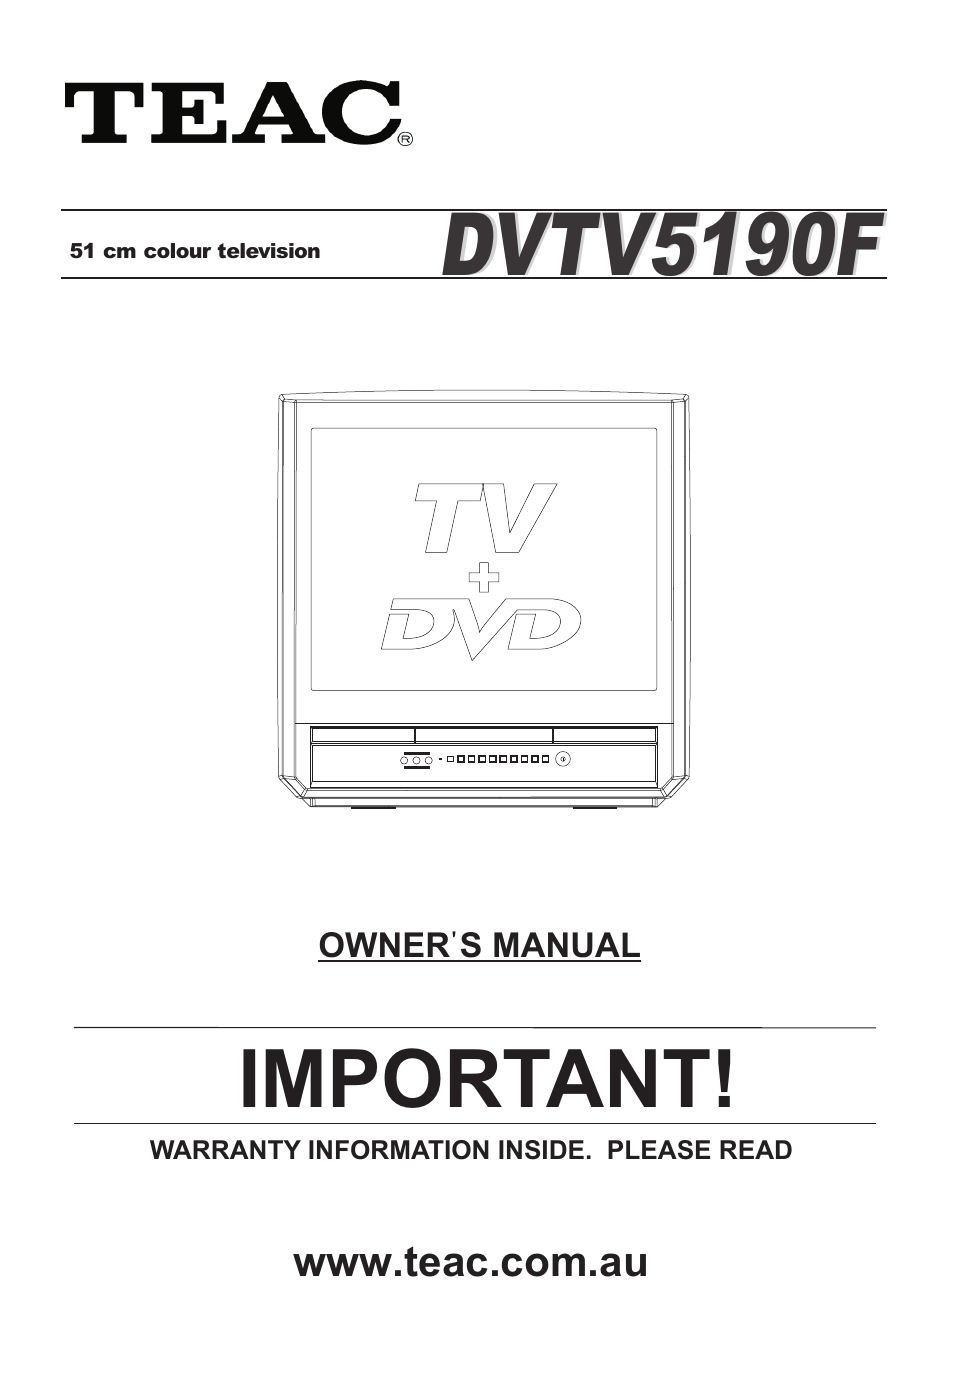 Teac DVTV5190F User Manual | 39 pages